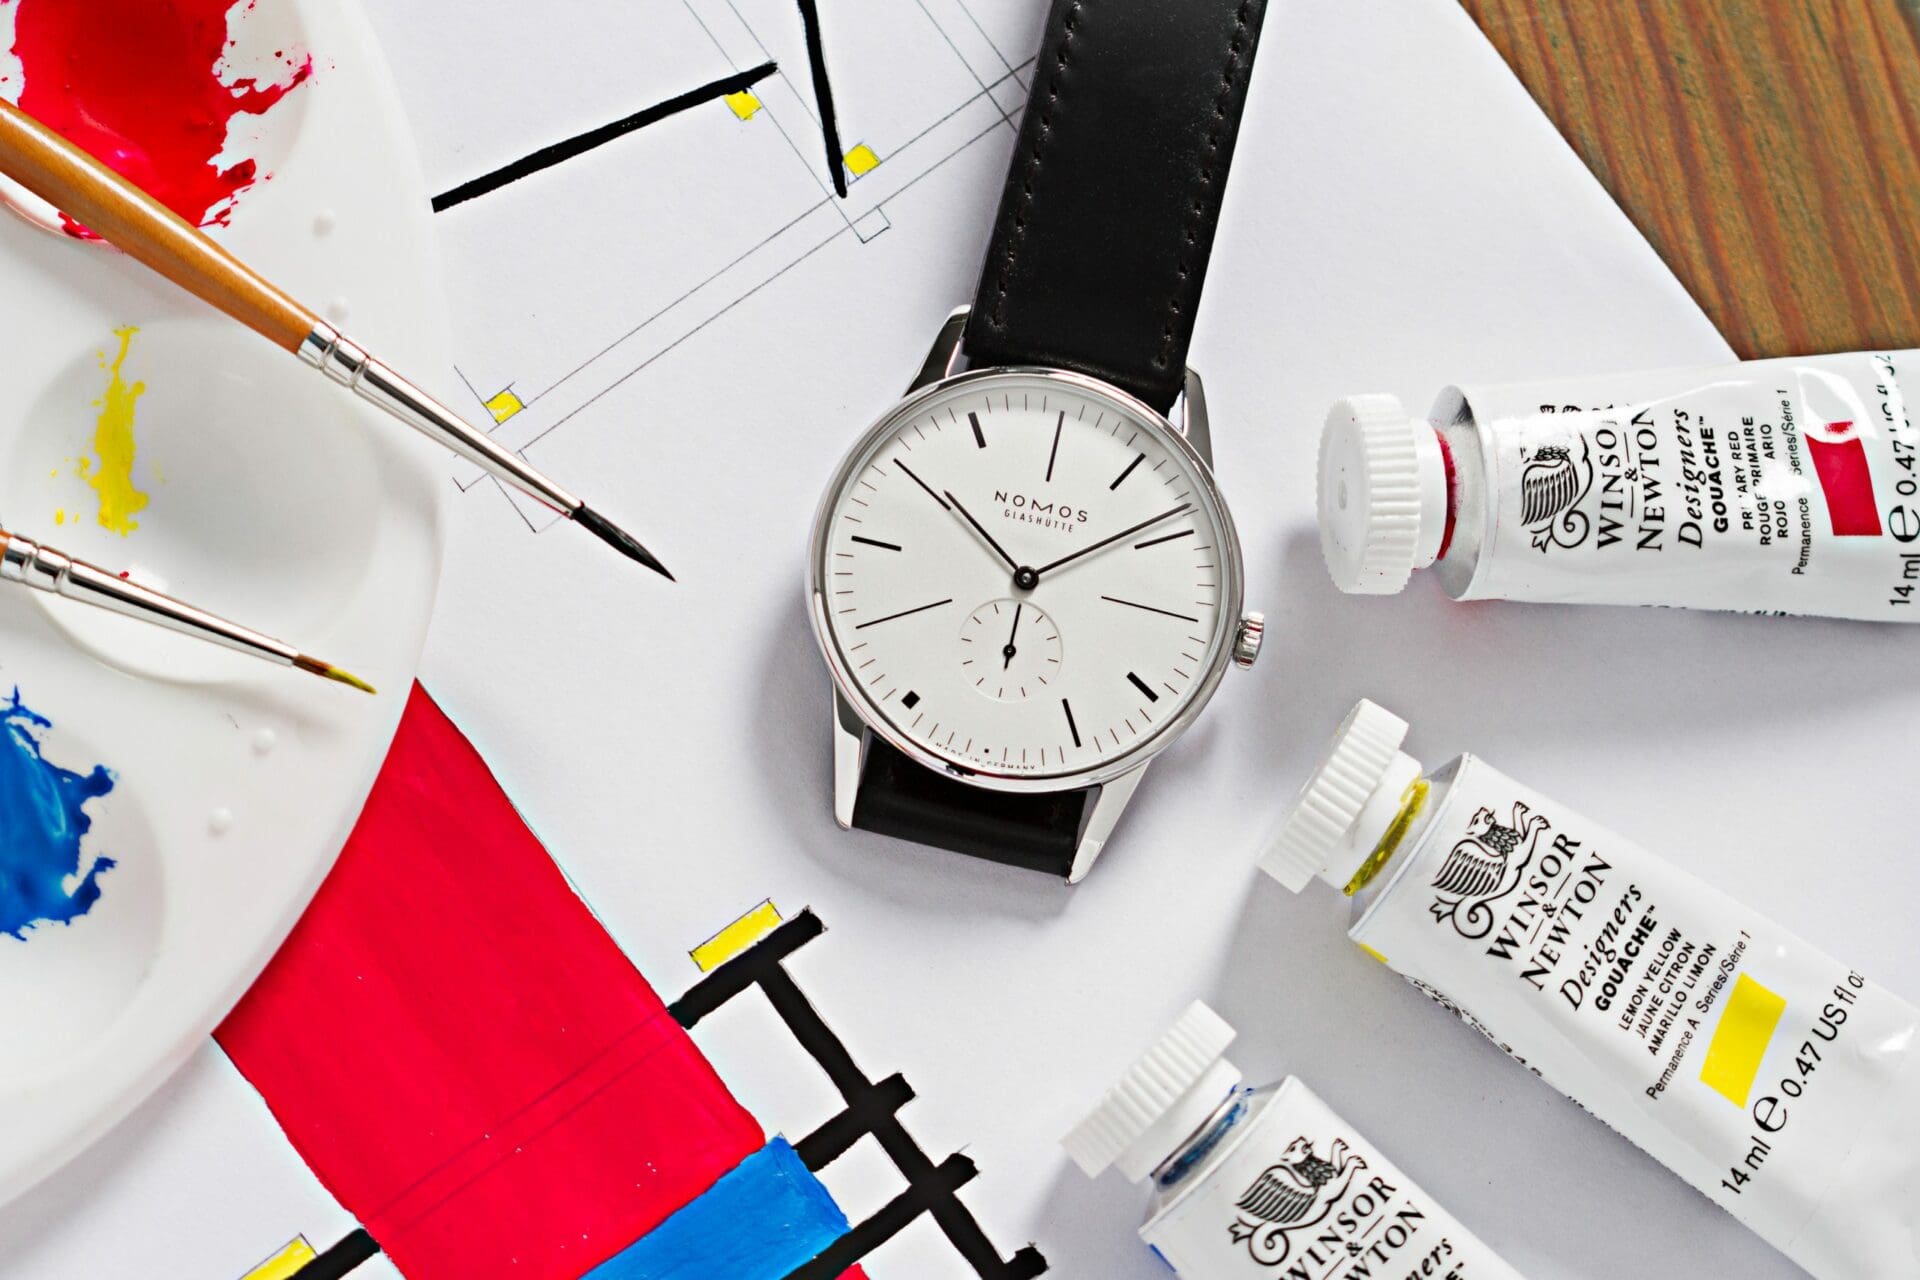 INTRODUCING: The Nomos Orion 38 100 years De Stijl Limited Edition for Ace Jewellers